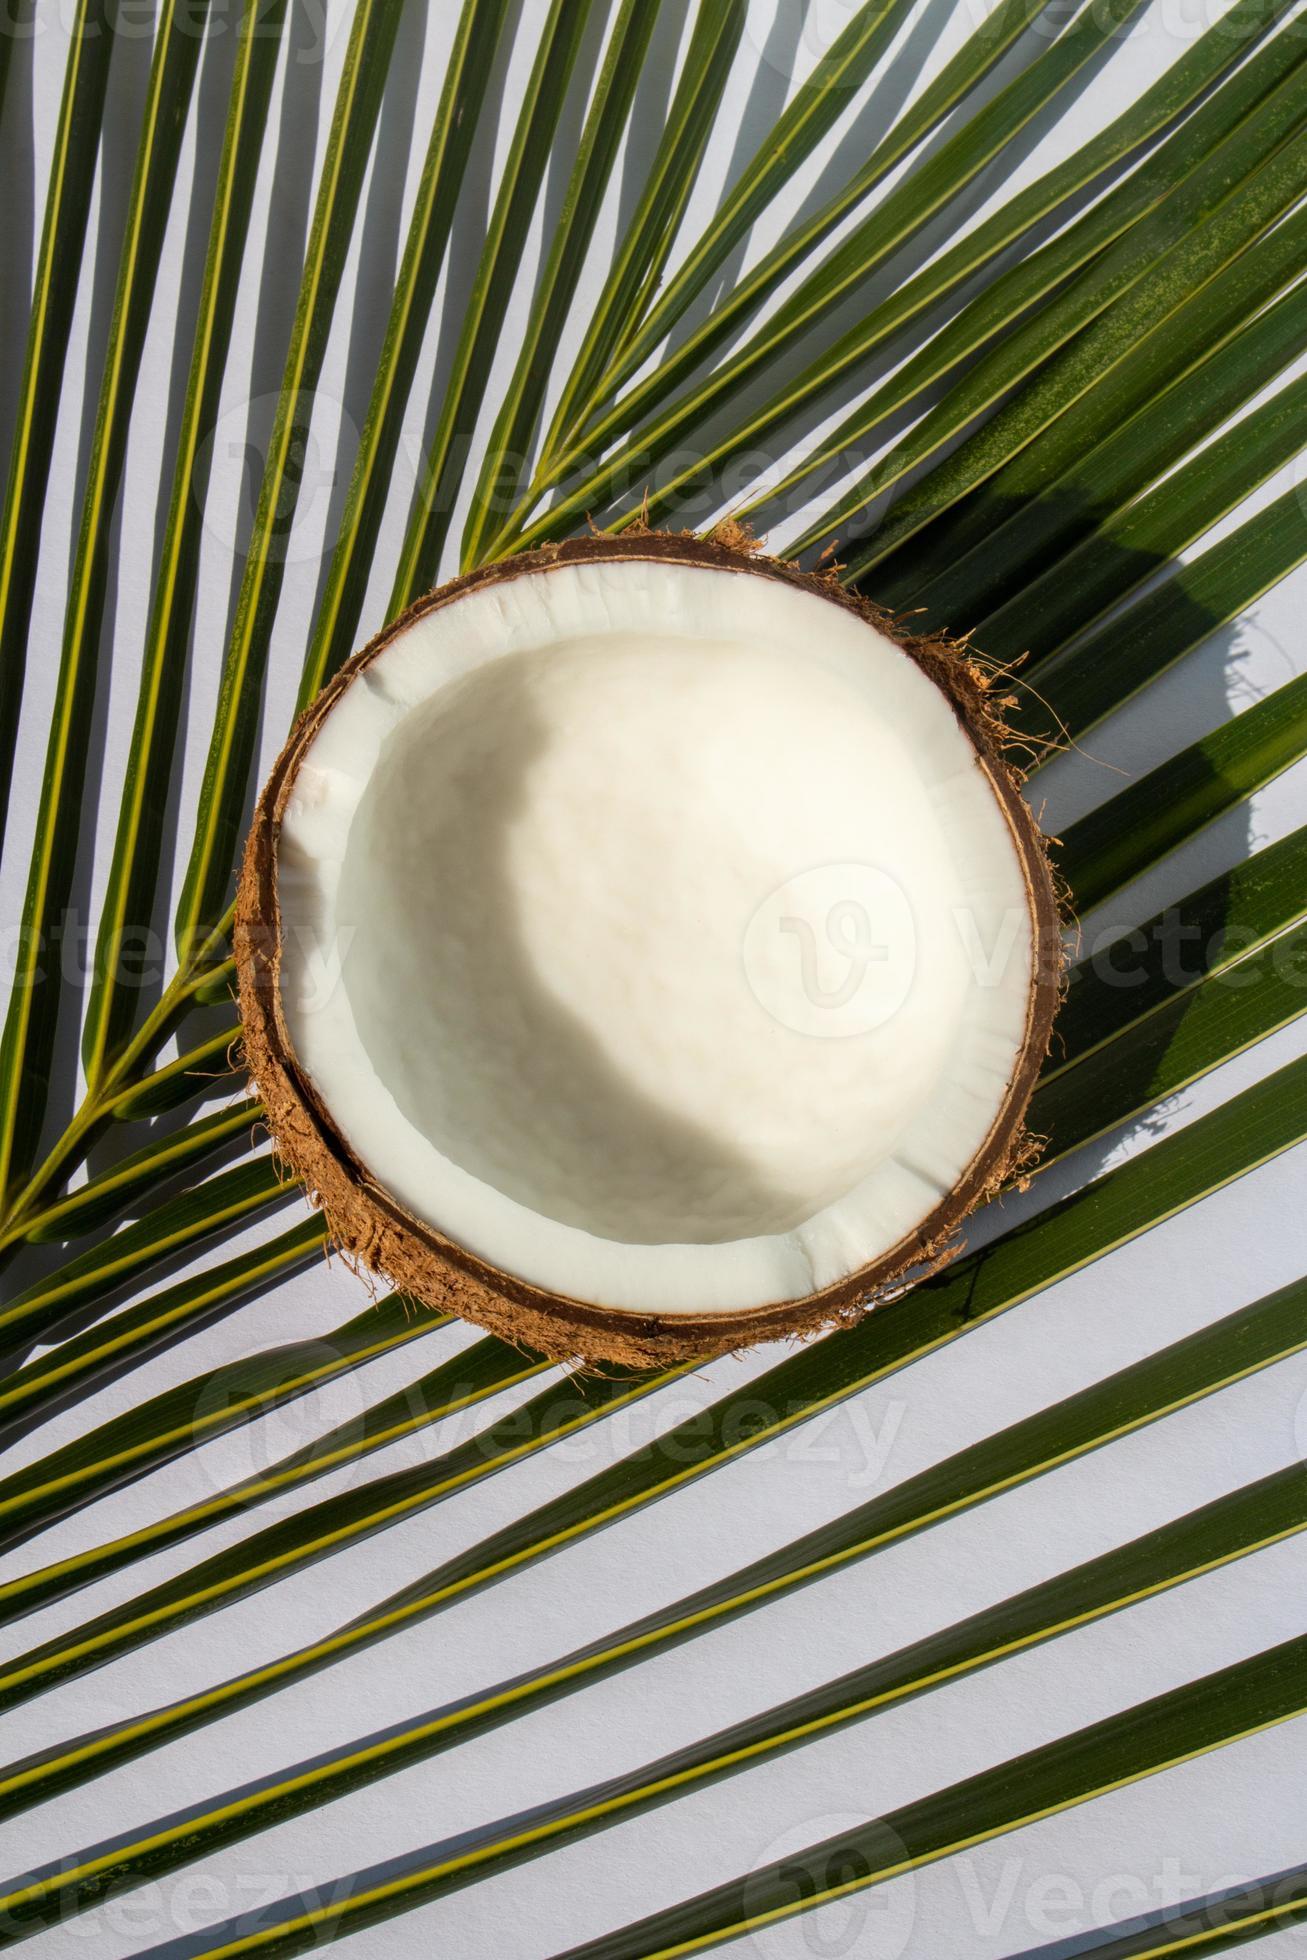 Tropical fruit concept, Halves of fresh white coconut with leaves on white fabric background